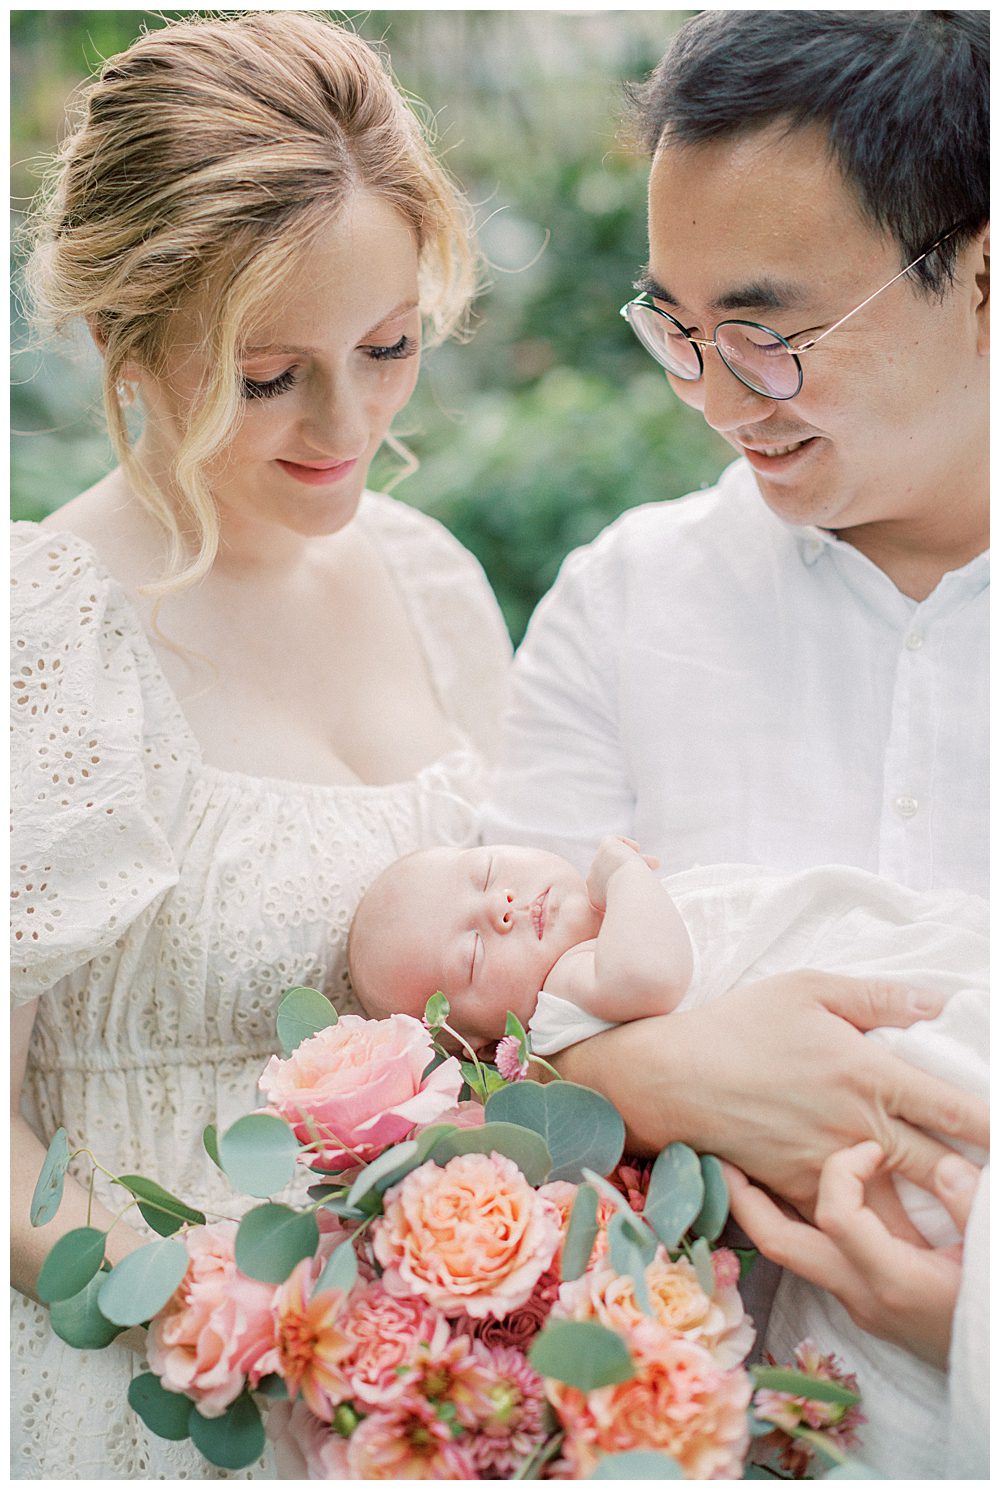 Newborn baby held on bouquet of roses by parents during Alexandria VA newborn session.